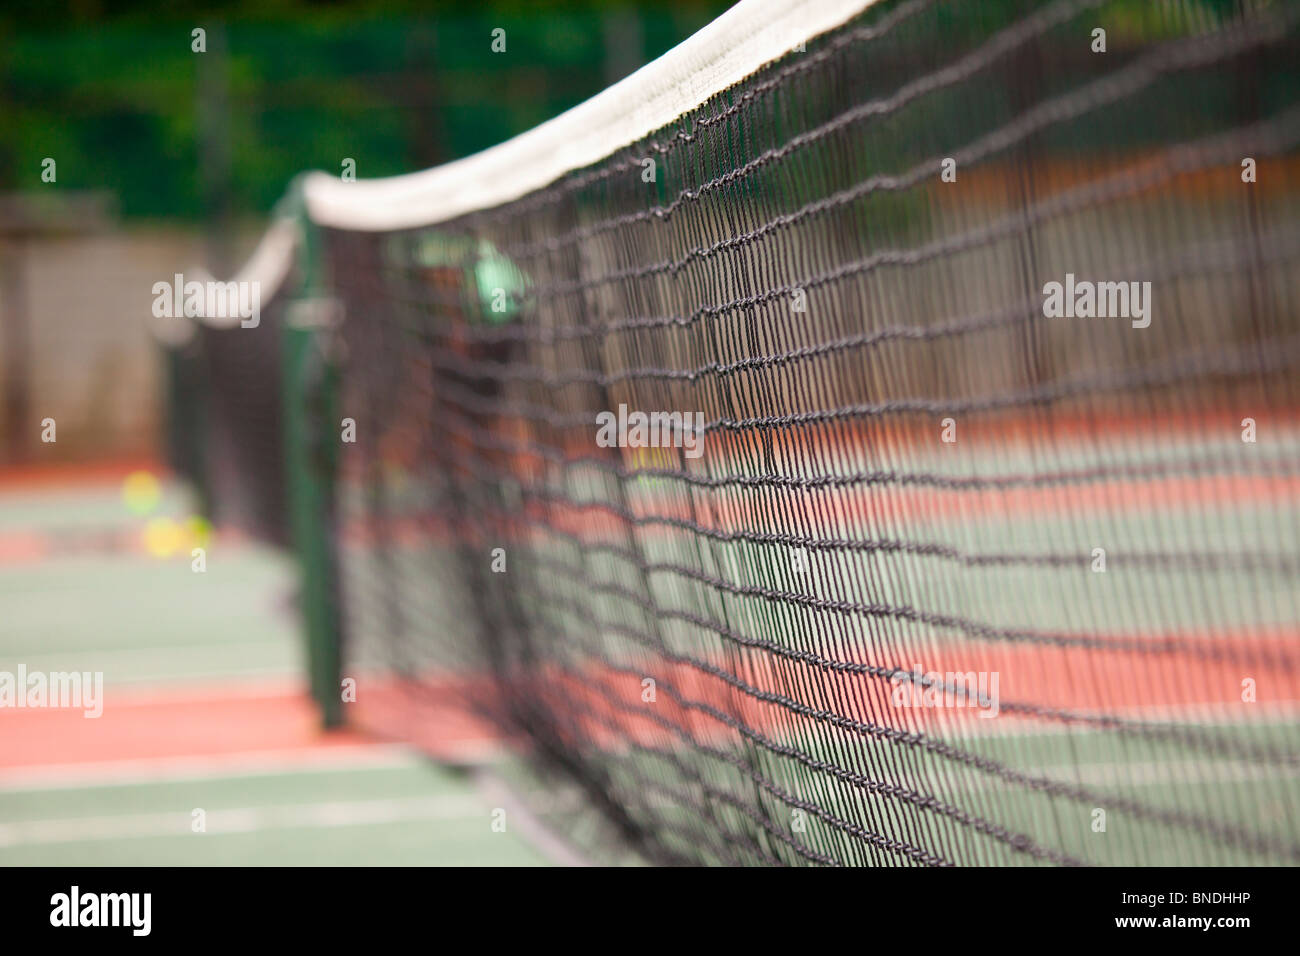 View across the net of tennis courts on a summers day Stock Photo